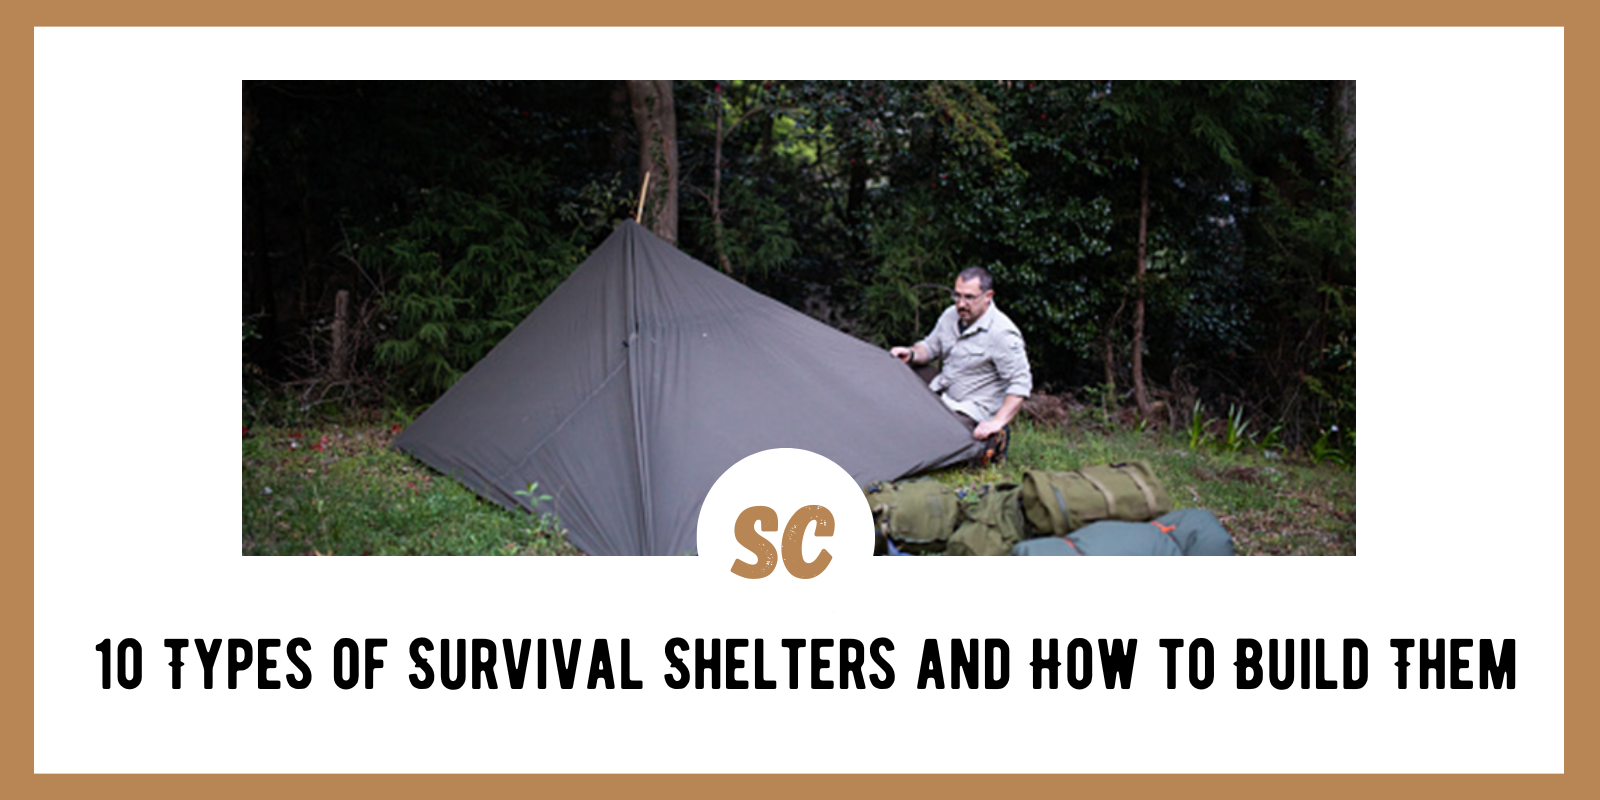 10 Types of Survival Shelters and How to Build Them